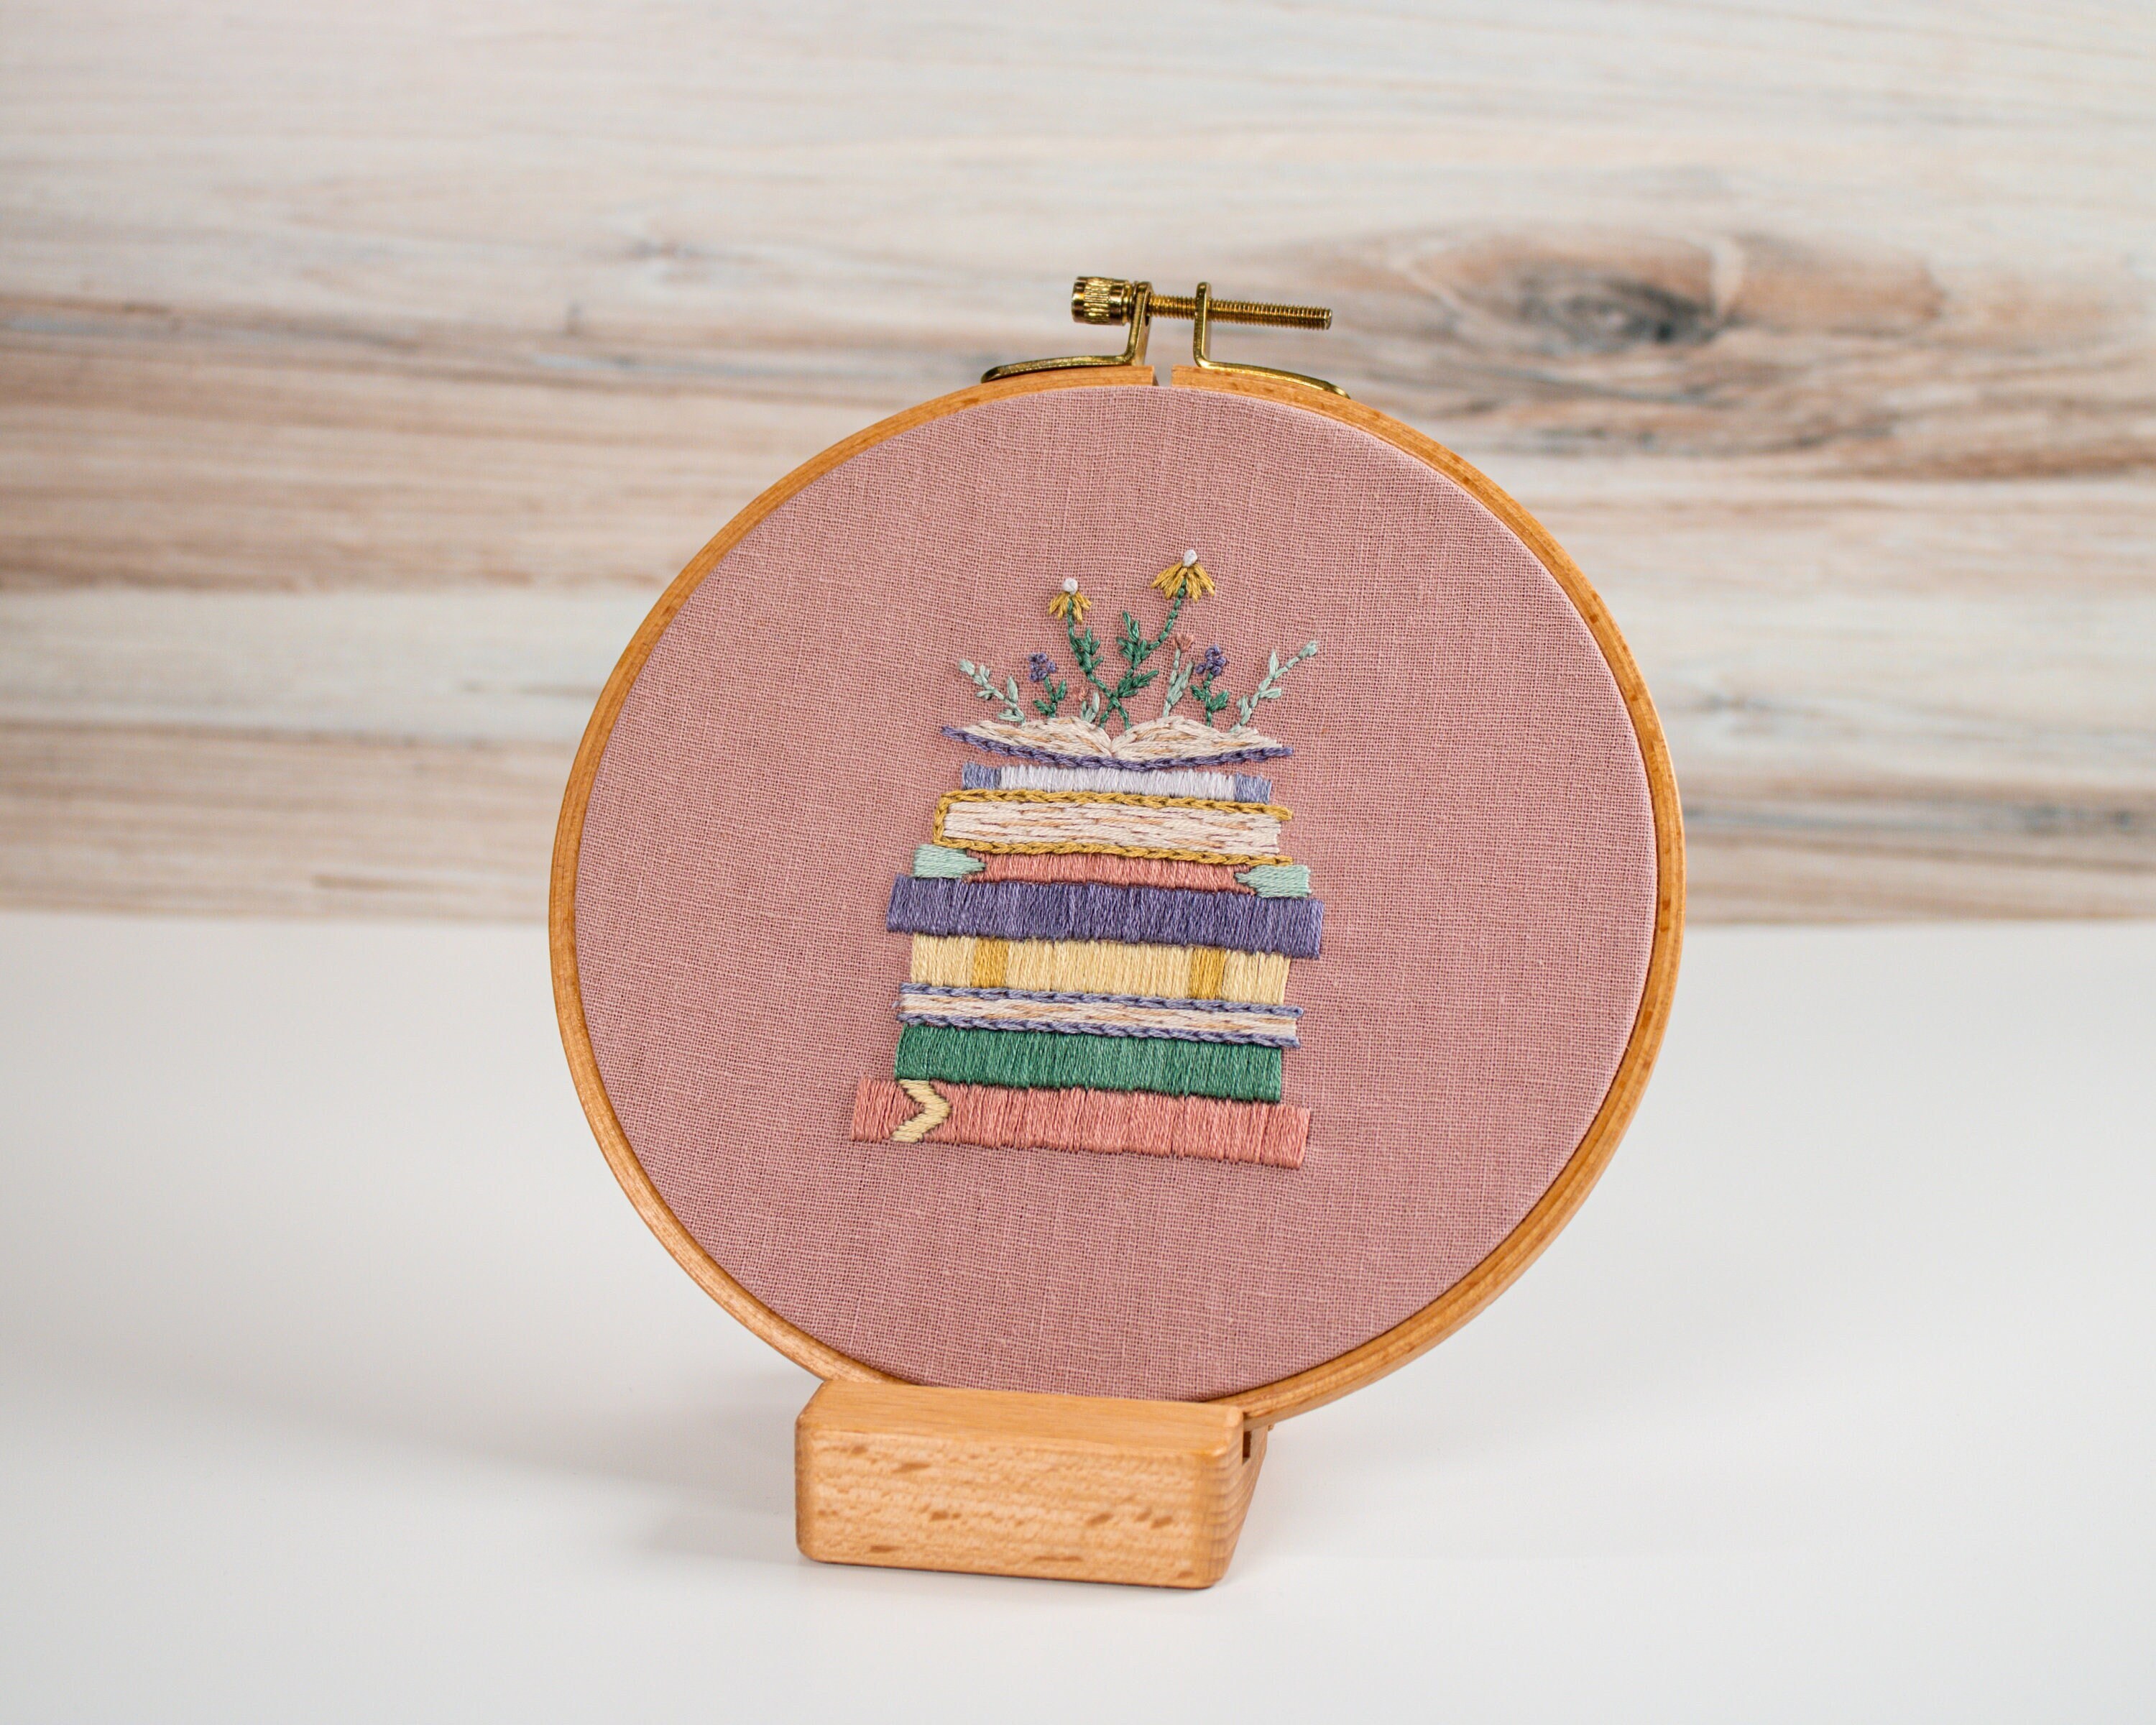 Open Book Hand Embroidery PDF Downloadable Pattern Tutorial